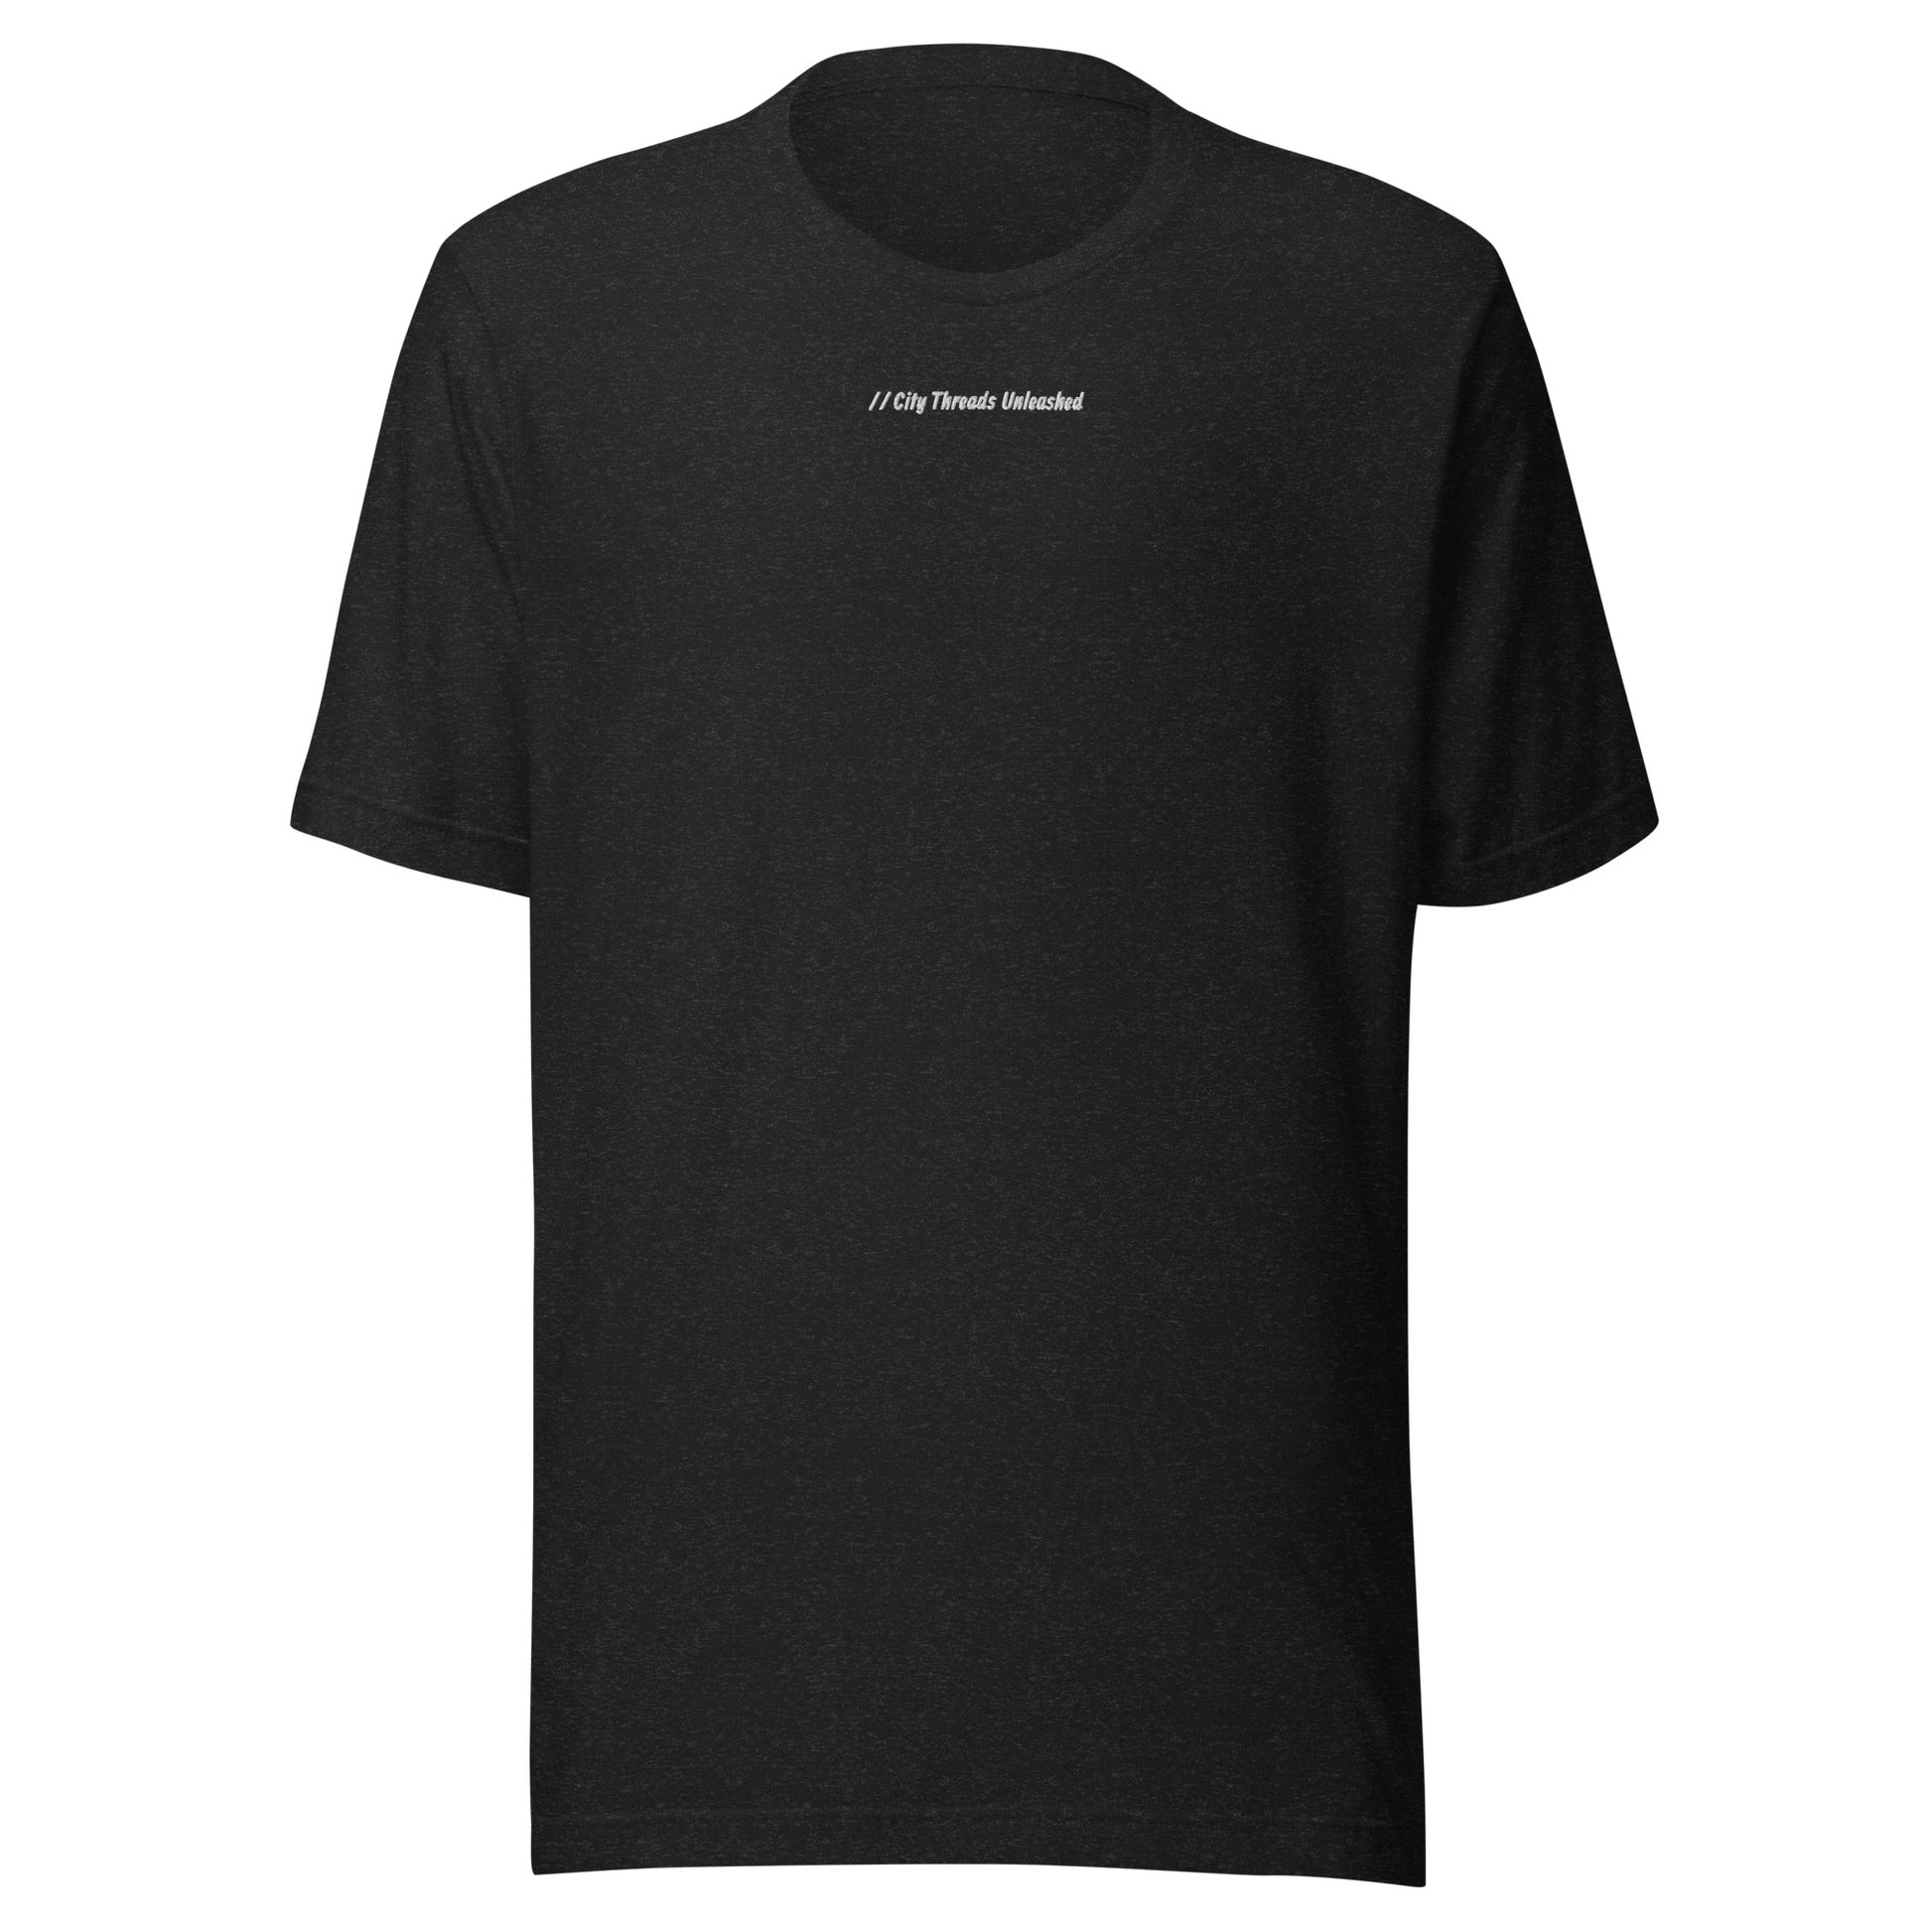 Embordered City Threads Unleashed t-shirt